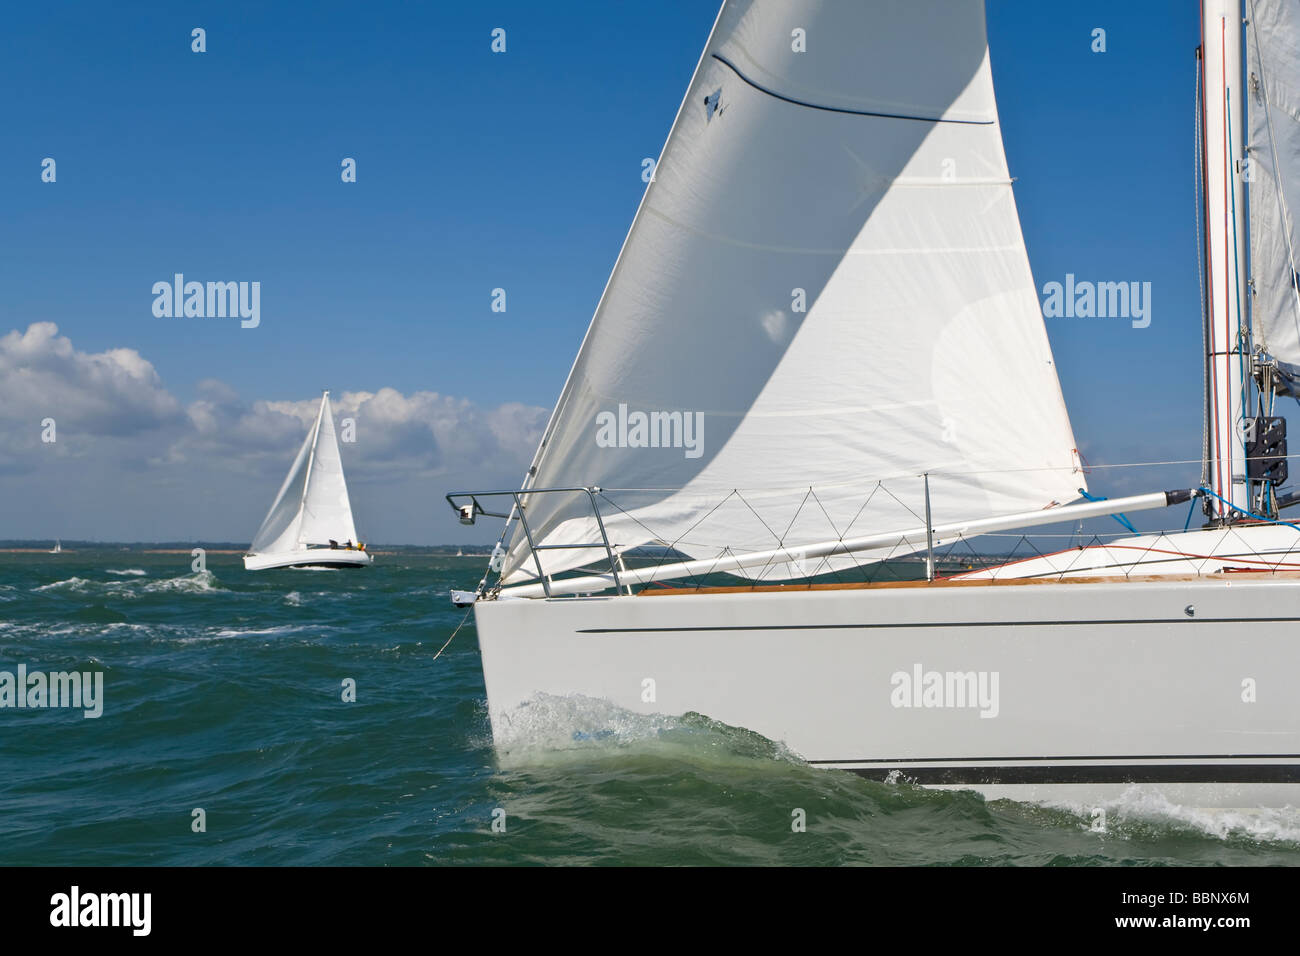 Two beautiful white yachts sailing on a bright sunny day Stock Photo